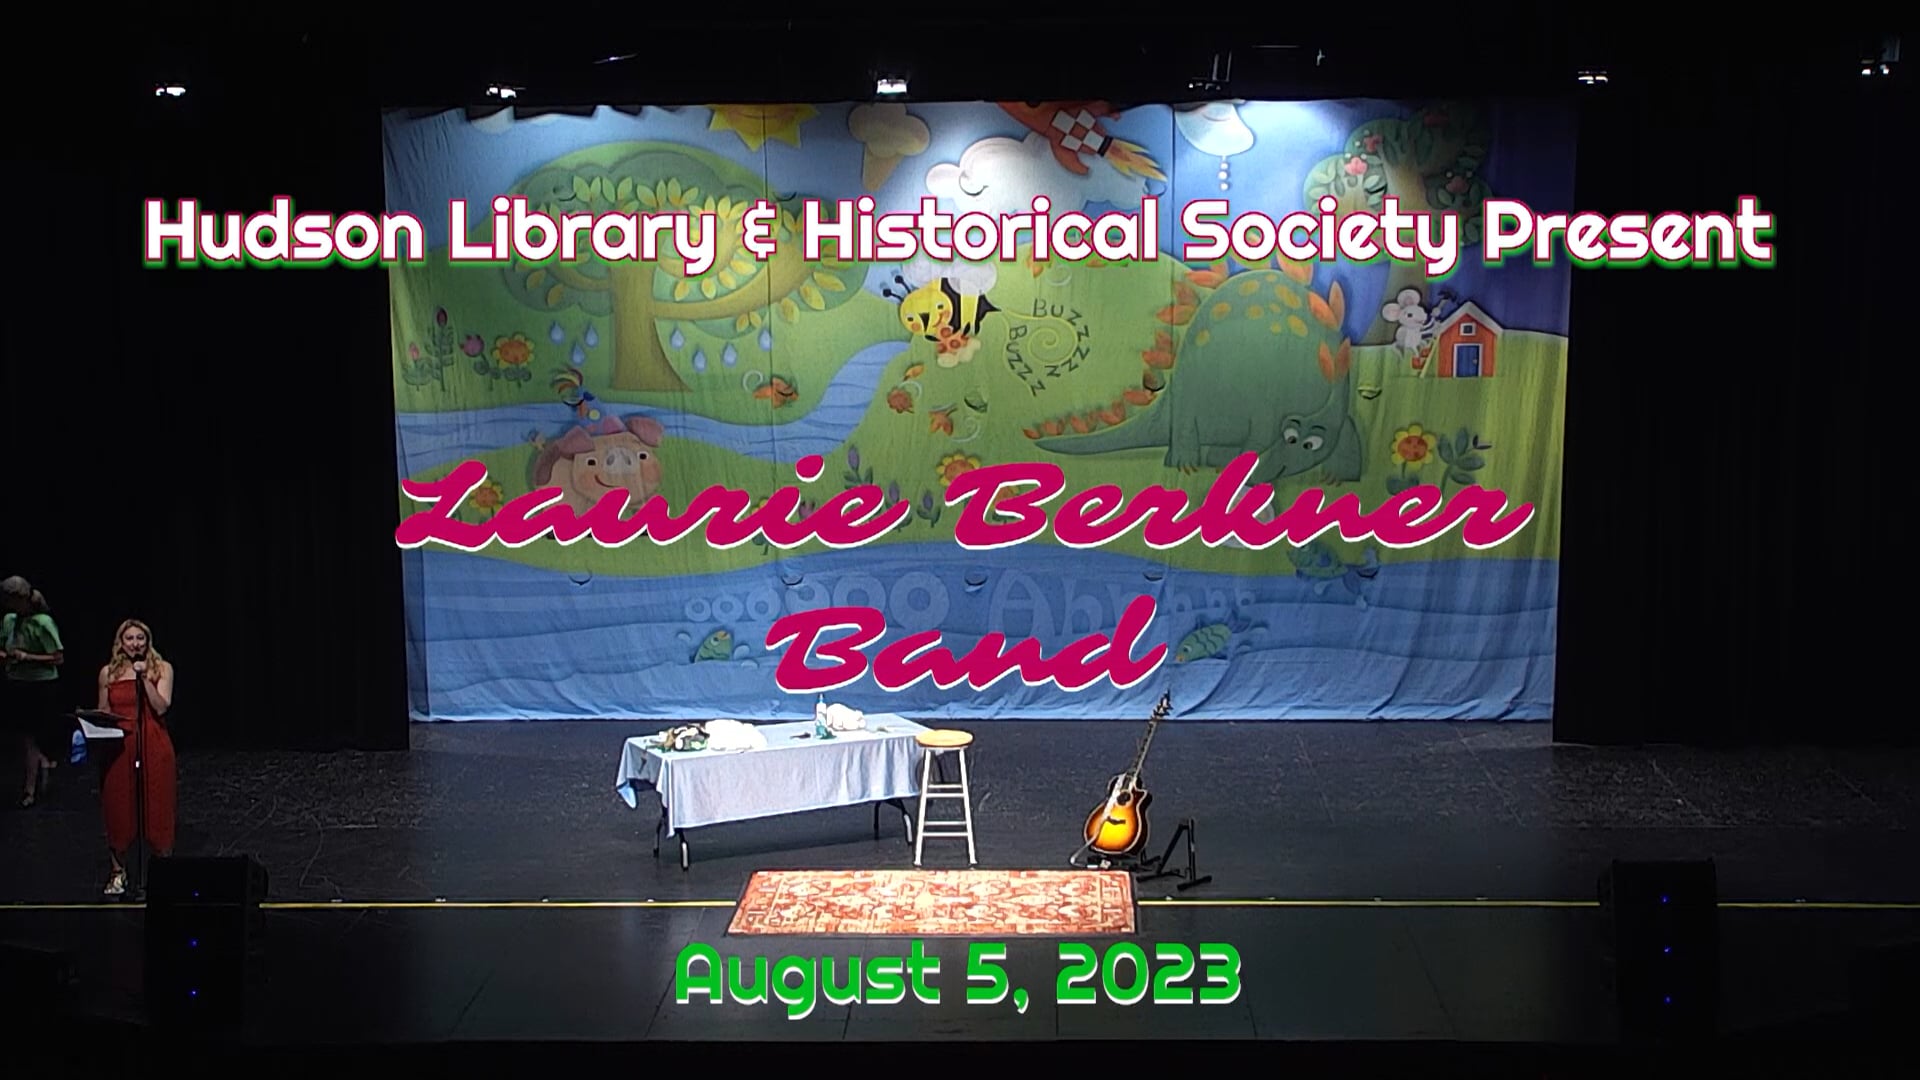 Hudson Library and Historical Society: Laurie Berkner Band - August 5, 2023